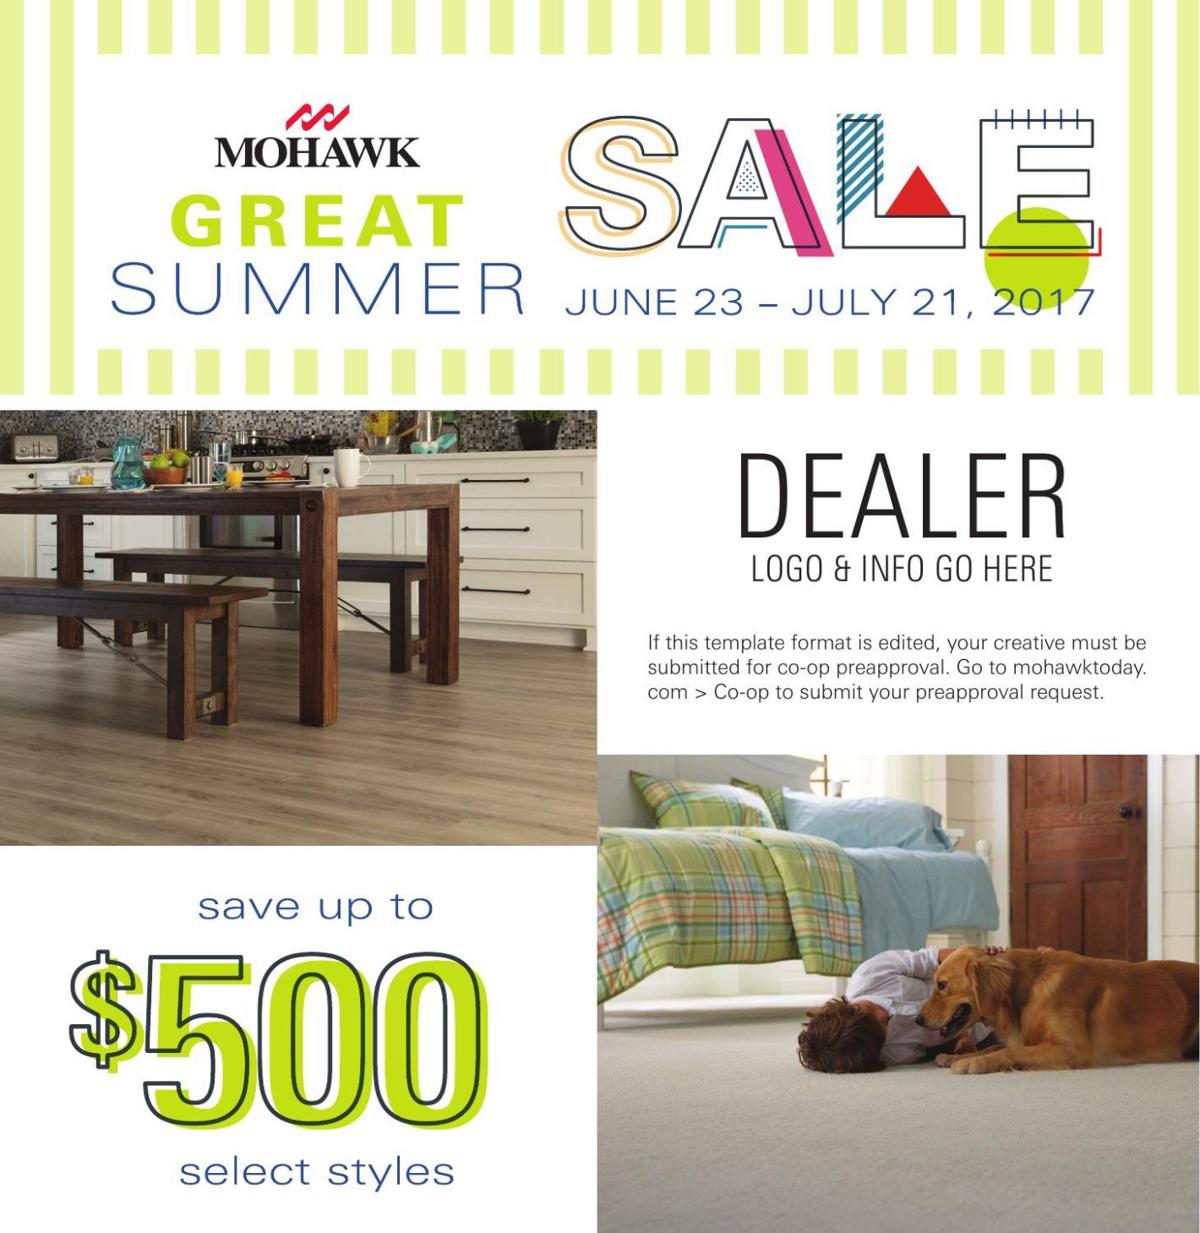 Mohawk Flooring Dealers To Advertise Great Summer Sale